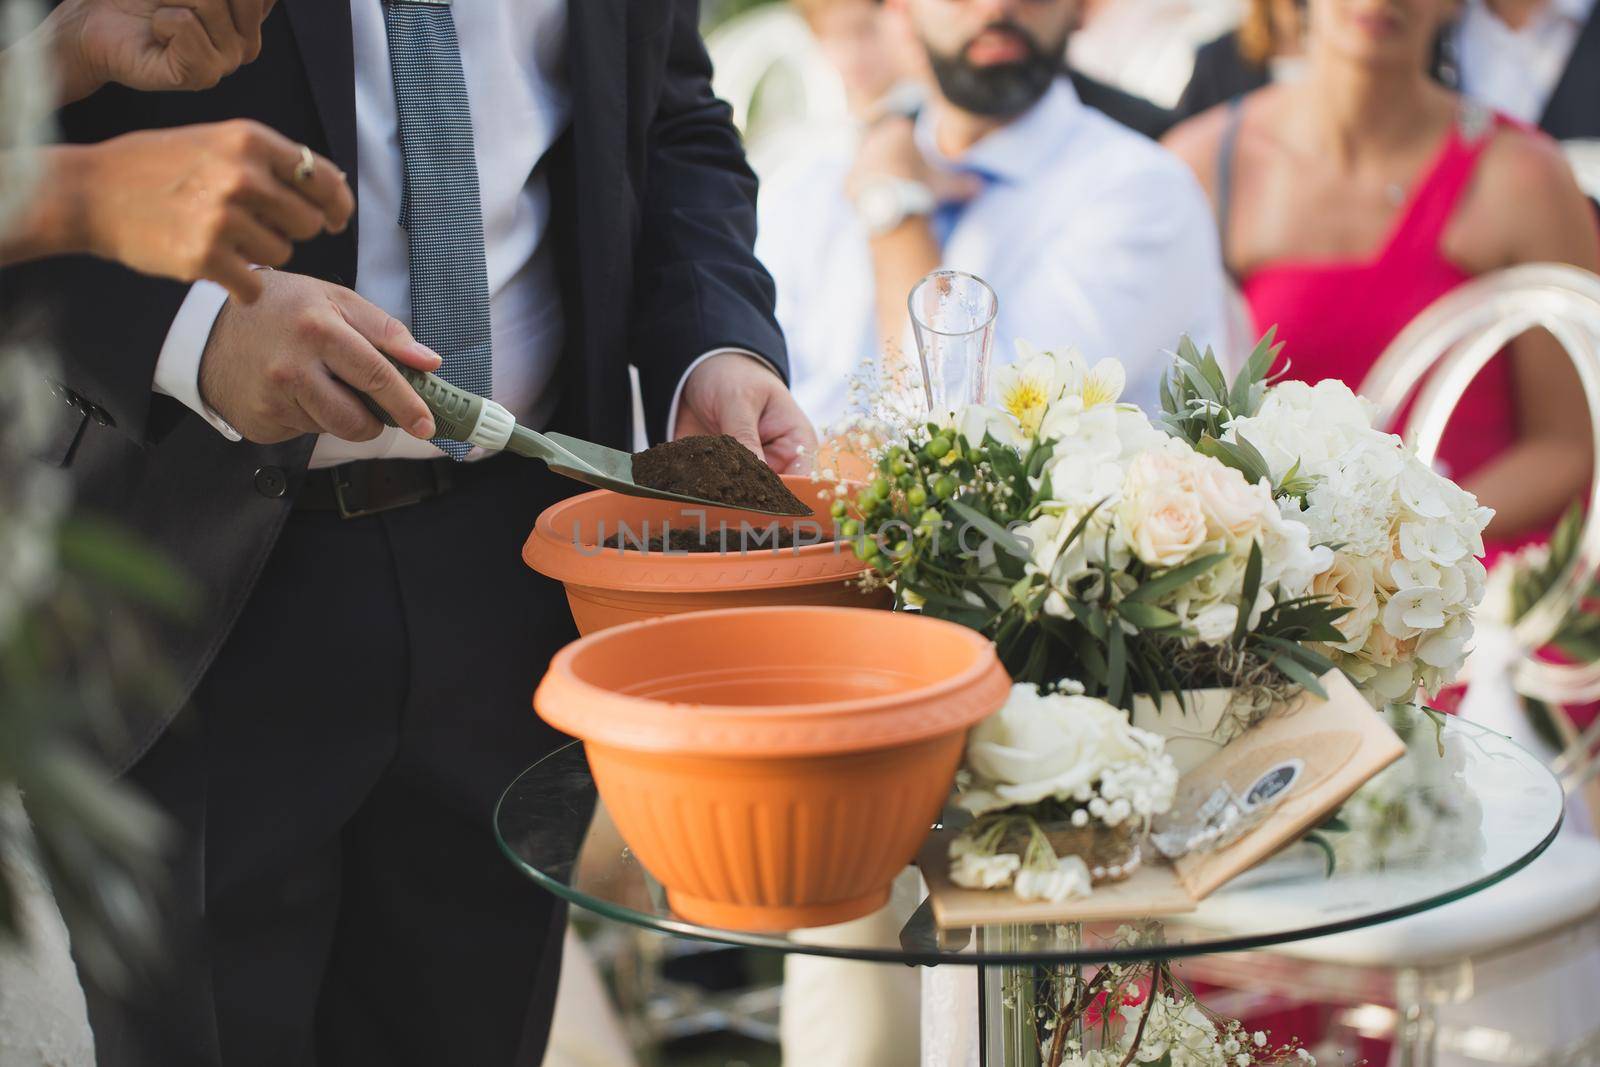 Family tradition. The bride and groom plant a plant in a pot during the wedding ceremony.